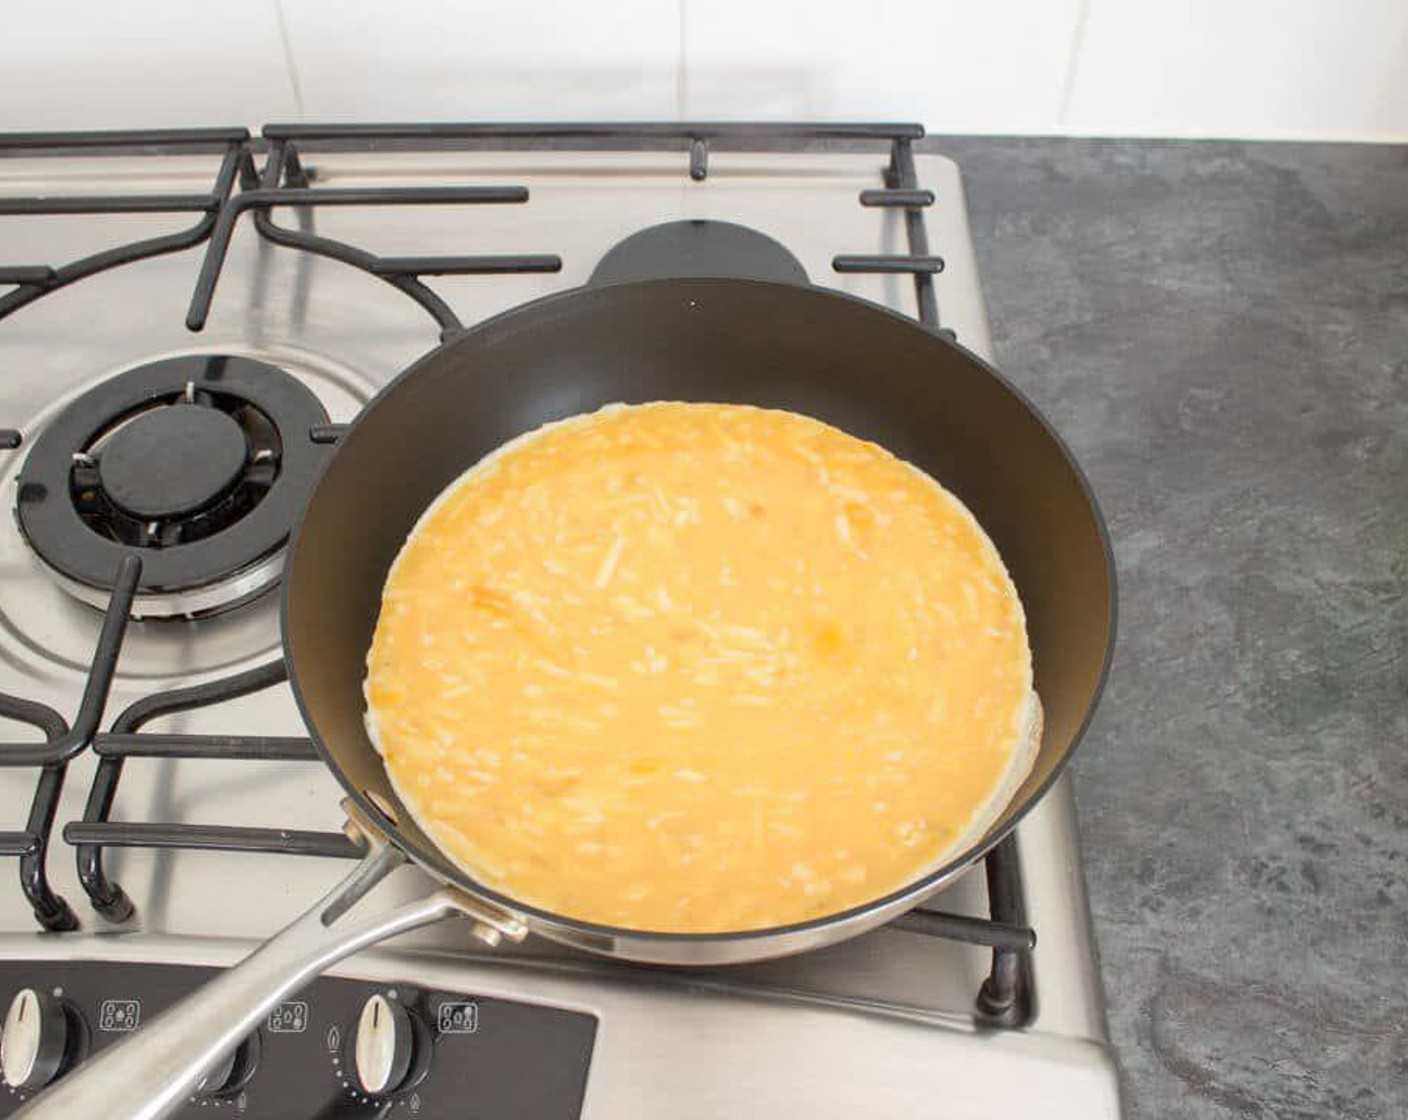 step 2 Heat a large non-stick frying pan over medium heat. When the pan is hot, pour in the egg mixture.